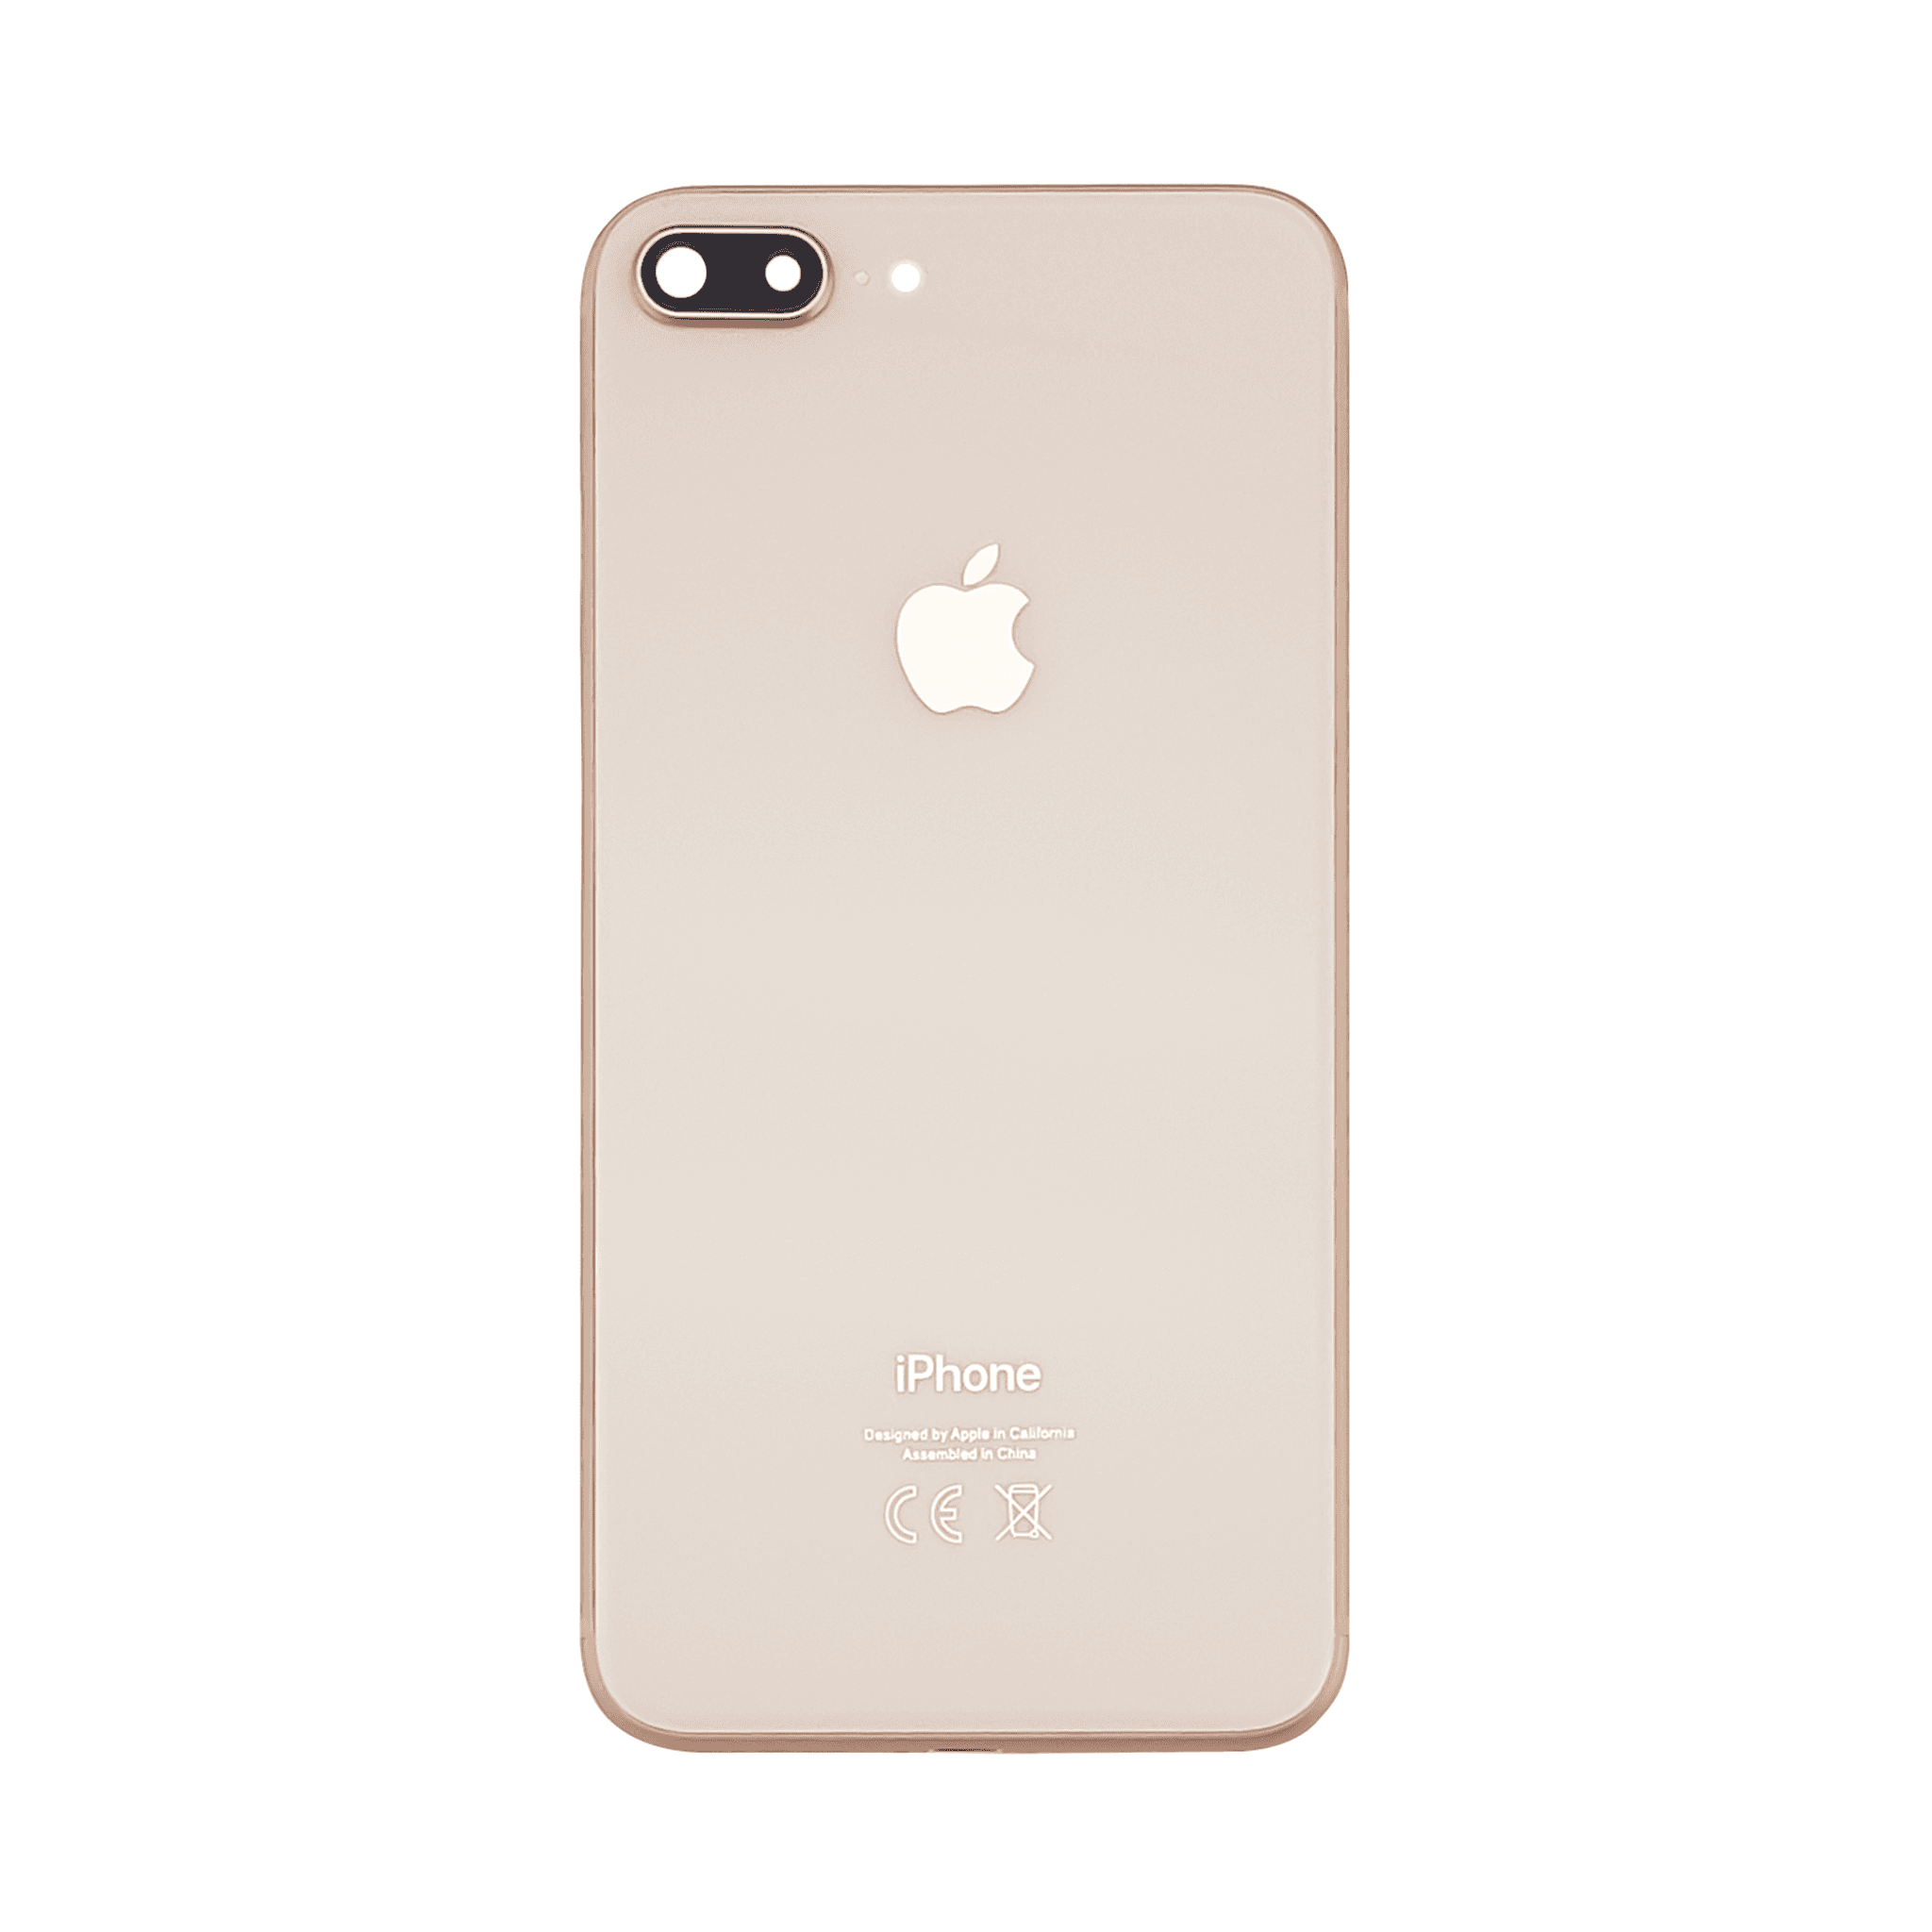 Body + battery cover iPhone 8 plus rose gold